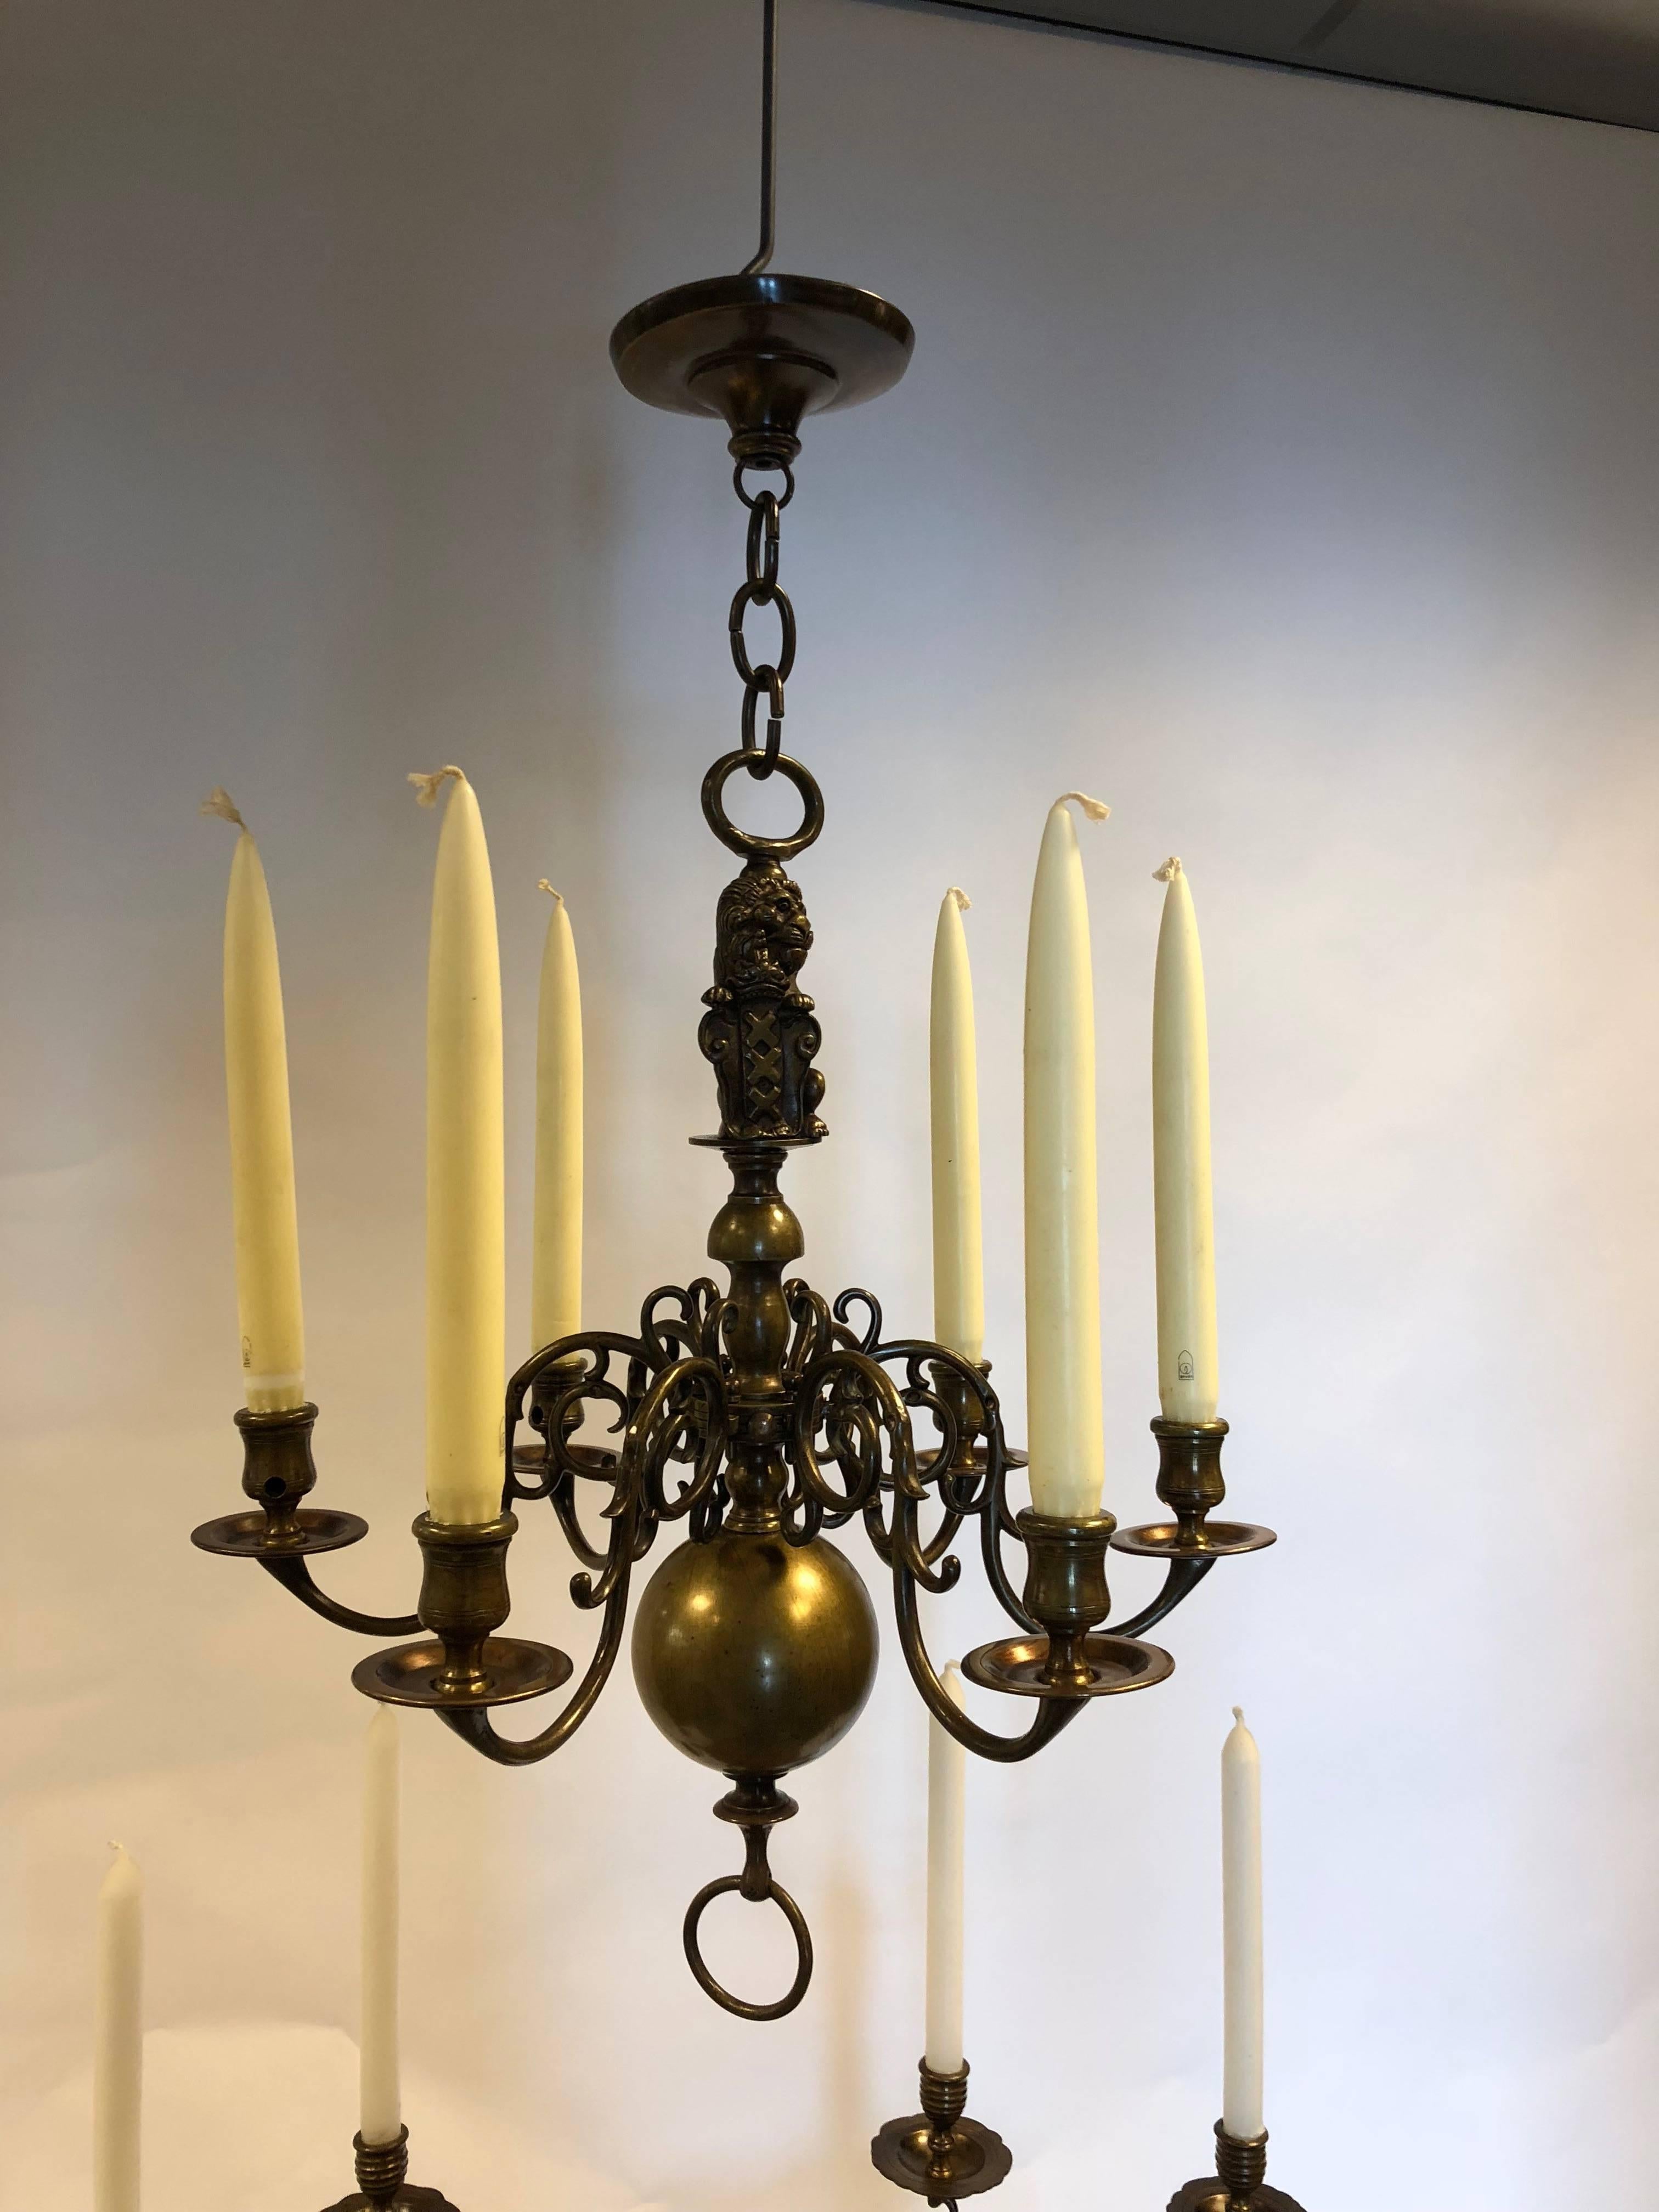 An six-lights antique bronze old Dutch chandelier with coat of arms from Amsterdam.
And a couple of bronze two-light candleholder with the coat of arms of Amsterdam from the 19th century.
Dimensions candleholders heights 25cm x wide 24cm.